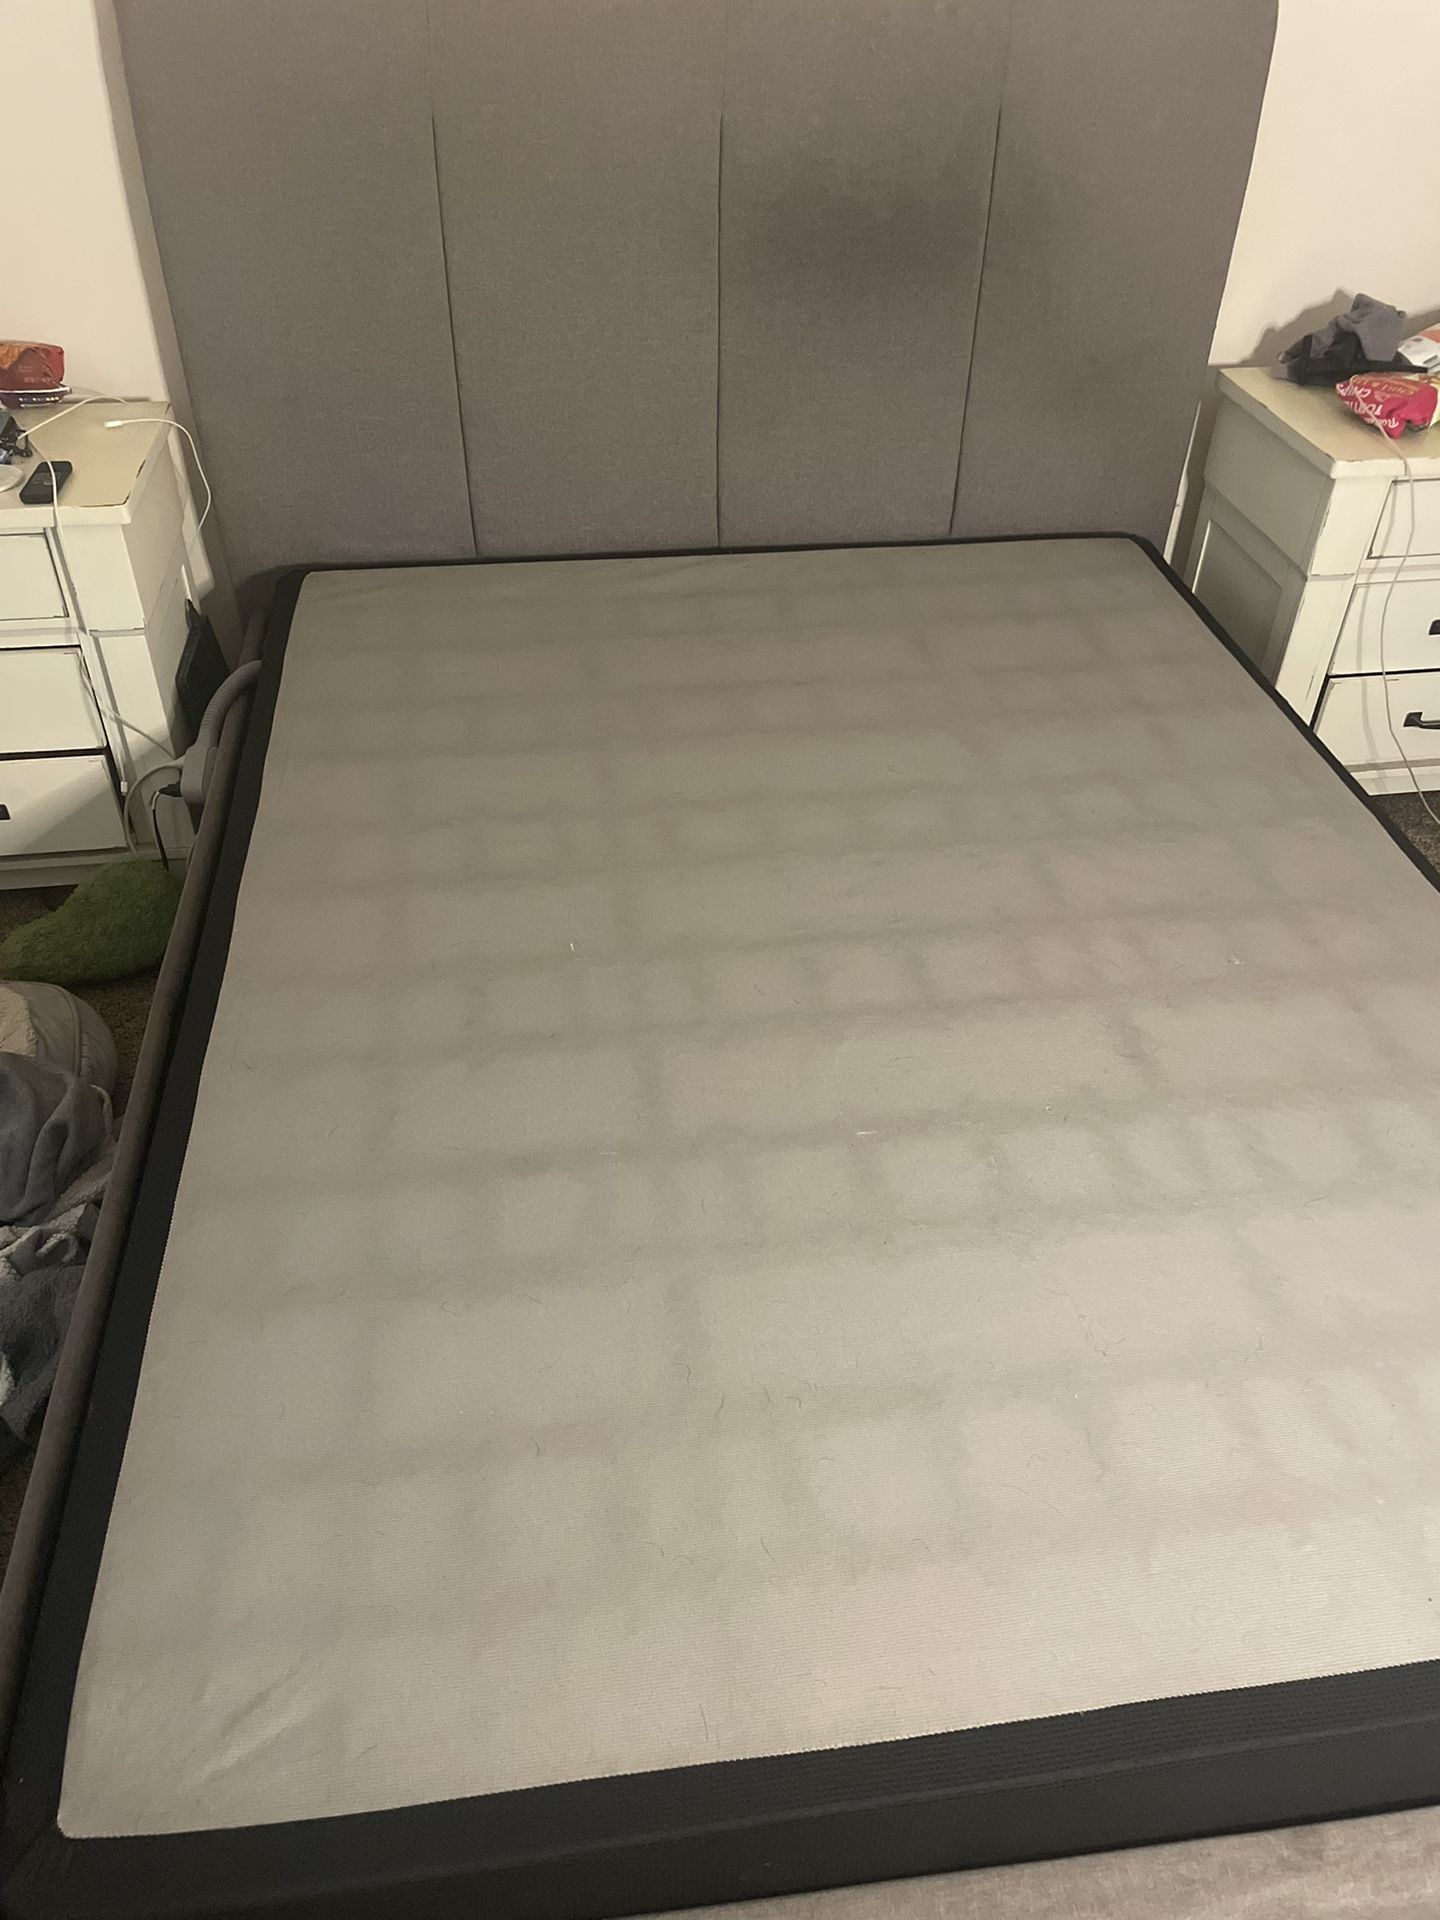 Queen Bed Frame with box spring